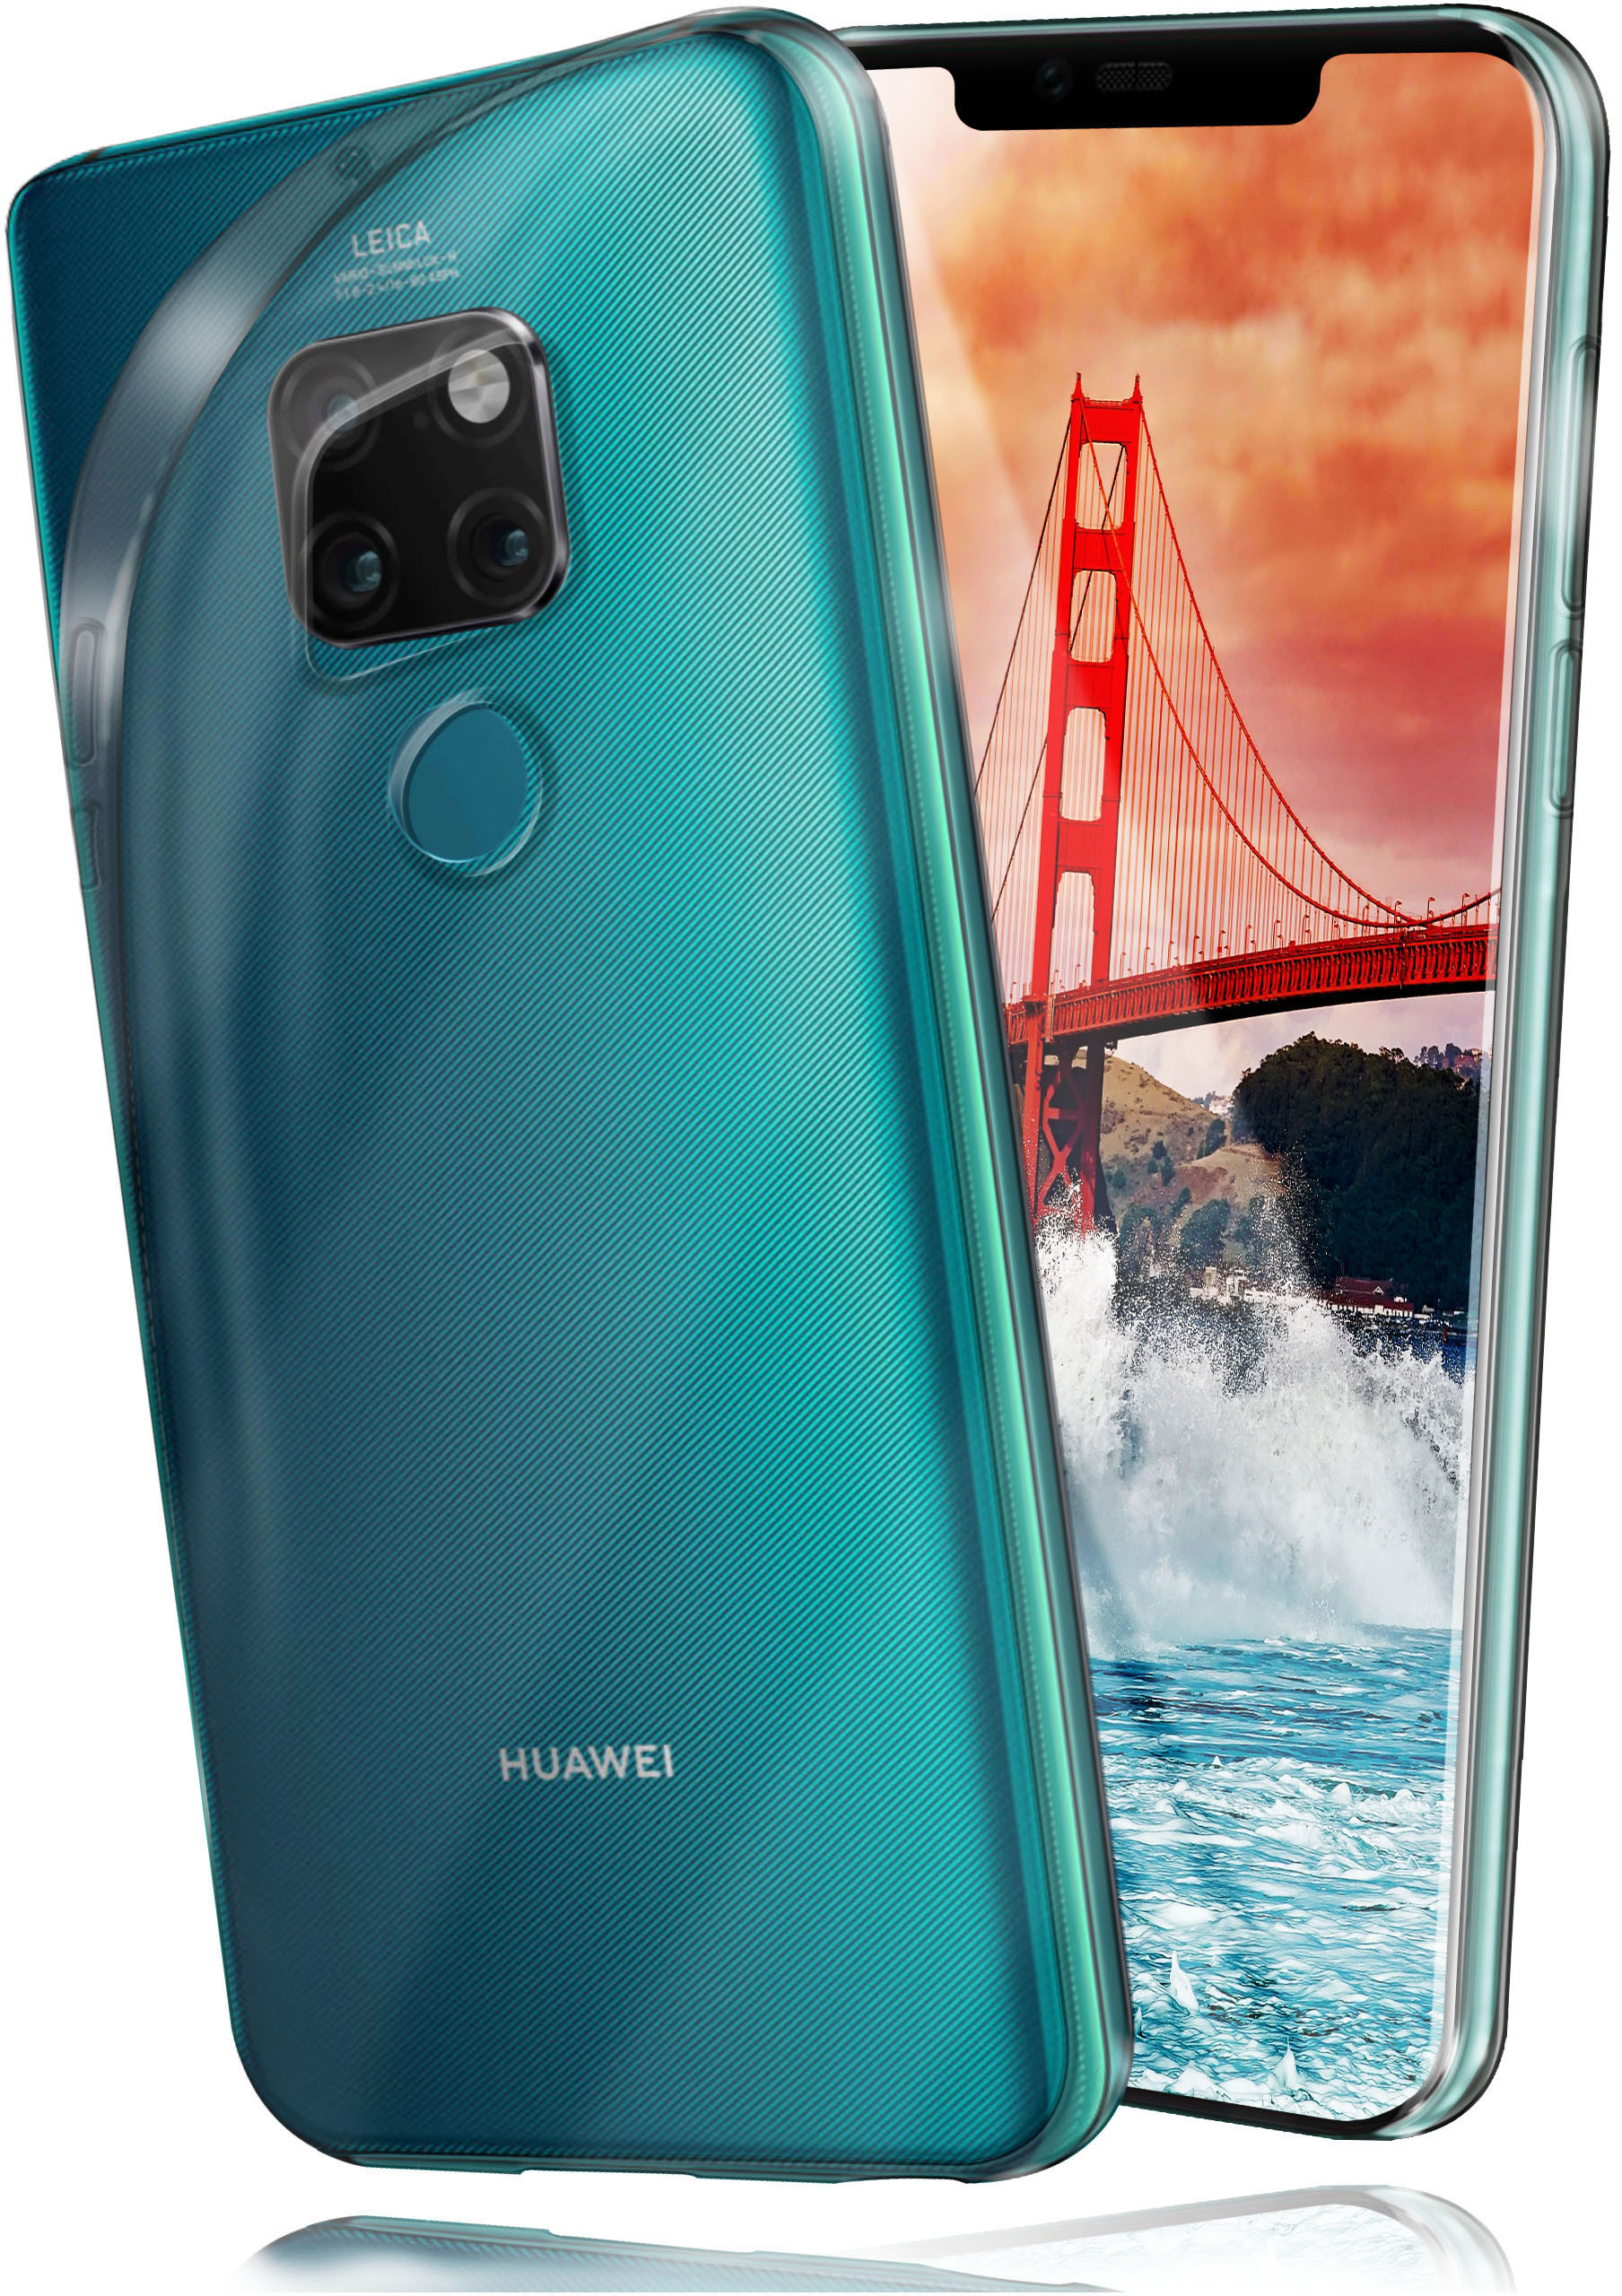 MOEX Aero Case, Mate Crystal-Clear Huawei, Backcover, 20,